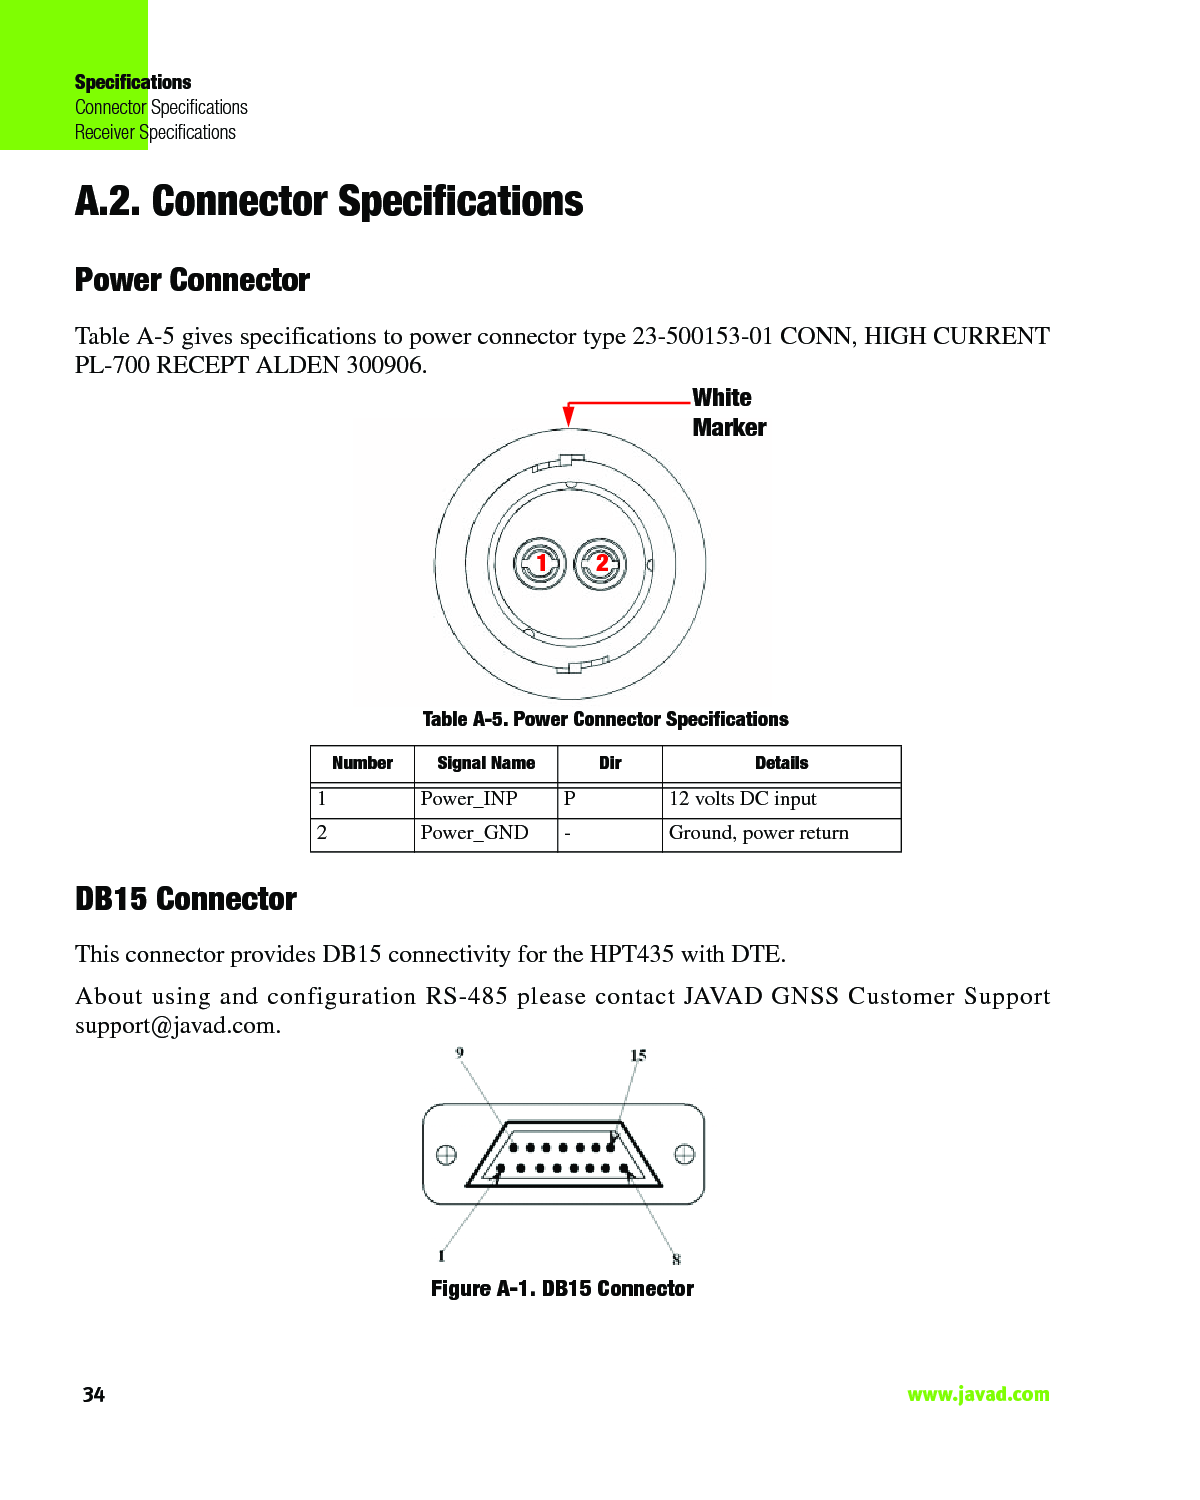 SpecificationsConnector SpecificationsReceiver Specifications34                                                                                                                     www.javad.comA.2. Connector SpecificationsPower ConnectorTable A-5 gives specifications to power connector type 23-500153-01 CONN, HIGH CURRENTPL-700 RECEPT ALDEN 300906.Table A-5. Power Connector SpecificationsDB15 ConnectorThis connector provides DB15 connectivity for the HPT435 with DTE.About using and configuration RS-485 please contact JAVAD GNSS Customer Supportsupport@javad.com. Figure A-1. DB15 Connector12White MarkerNumber Signal Name Dir Details1 Power_INP P 12 volts DC input2 Power_GND - Ground, power return